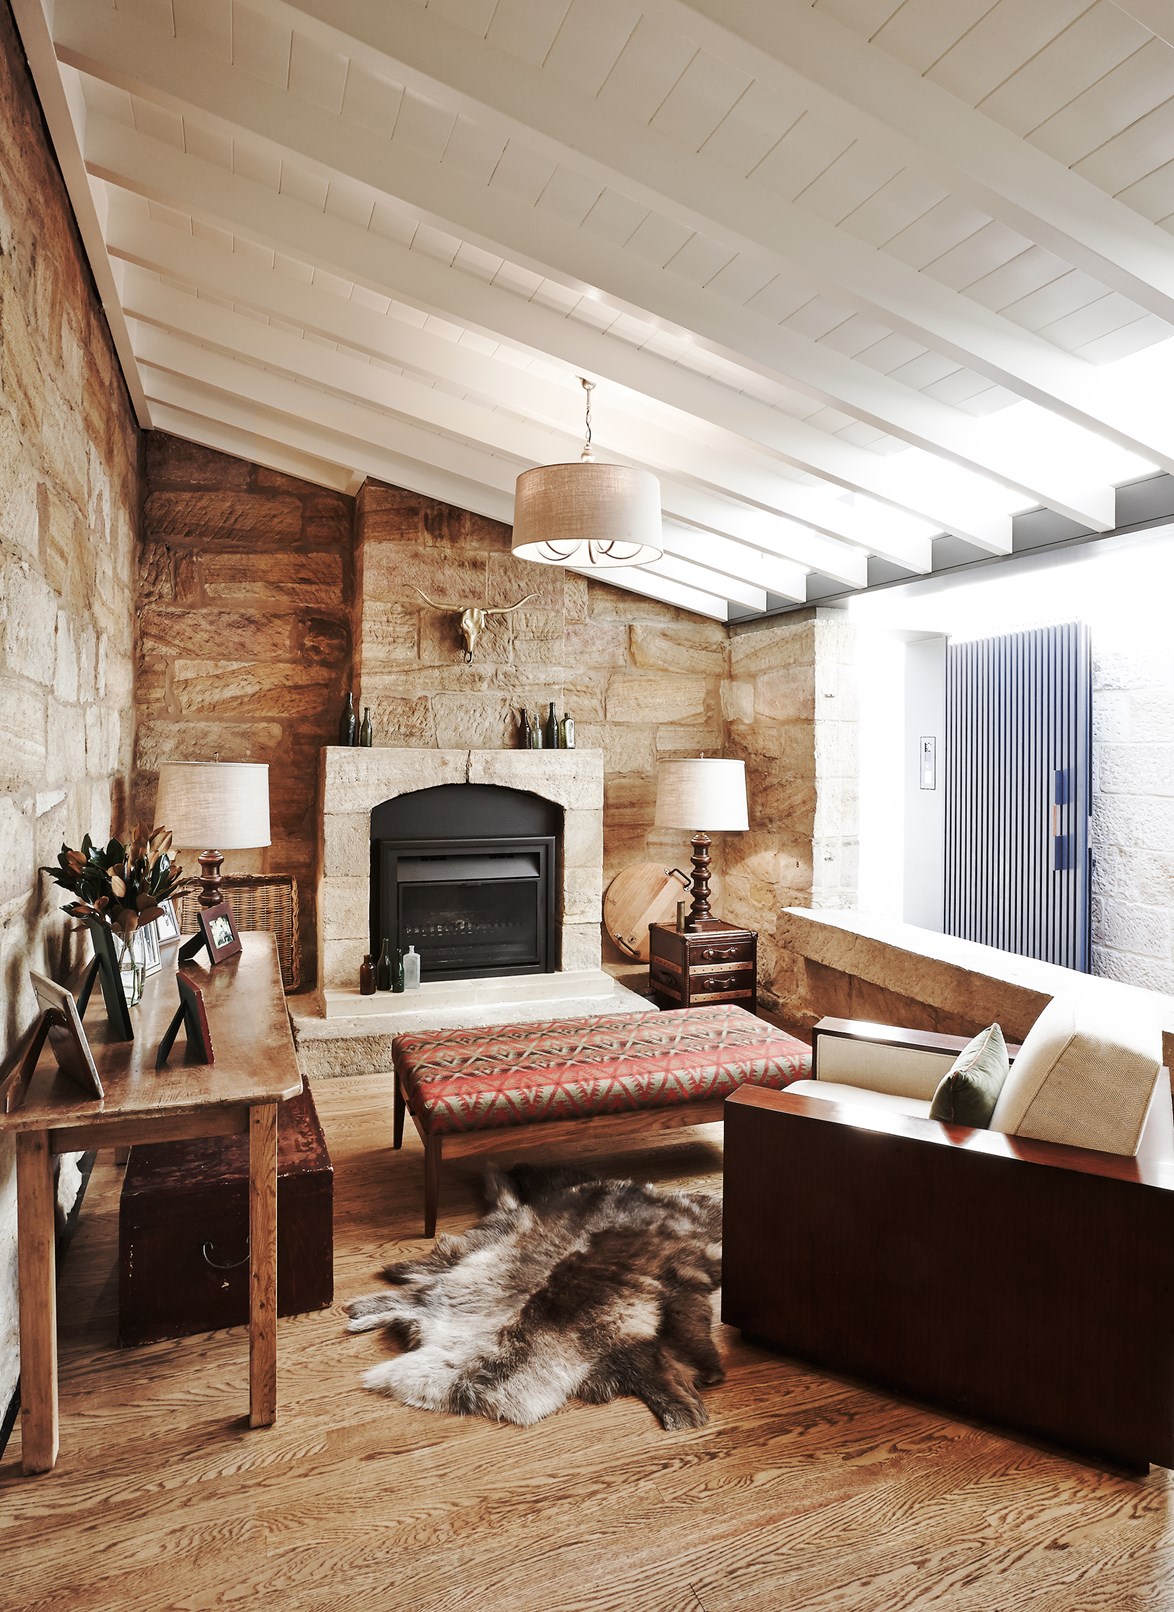 The original pink-coloured Hunters Hill sandstone was preserved and celebrated in the fireplace of [this heritage cottage,](https://www.homestolove.com.au/heritage-cottage-with-a-modern-extension-3879|target="_blank") which now sports a striking modern addition at the rear.